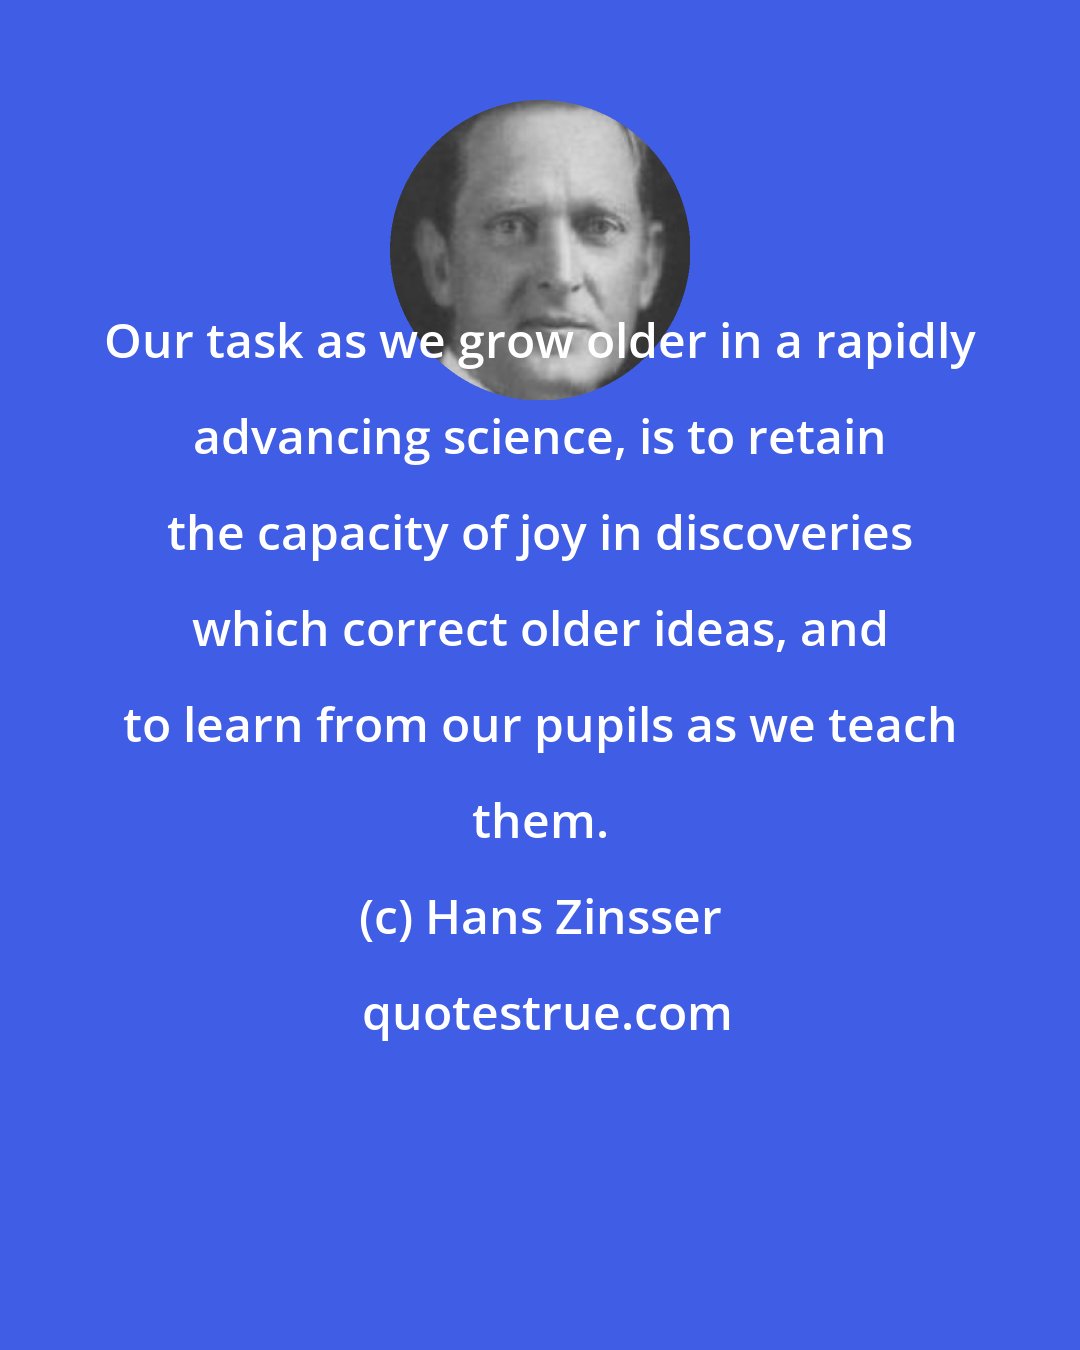 Hans Zinsser: Our task as we grow older in a rapidly advancing science, is to retain the capacity of joy in discoveries which correct older ideas, and to learn from our pupils as we teach them.